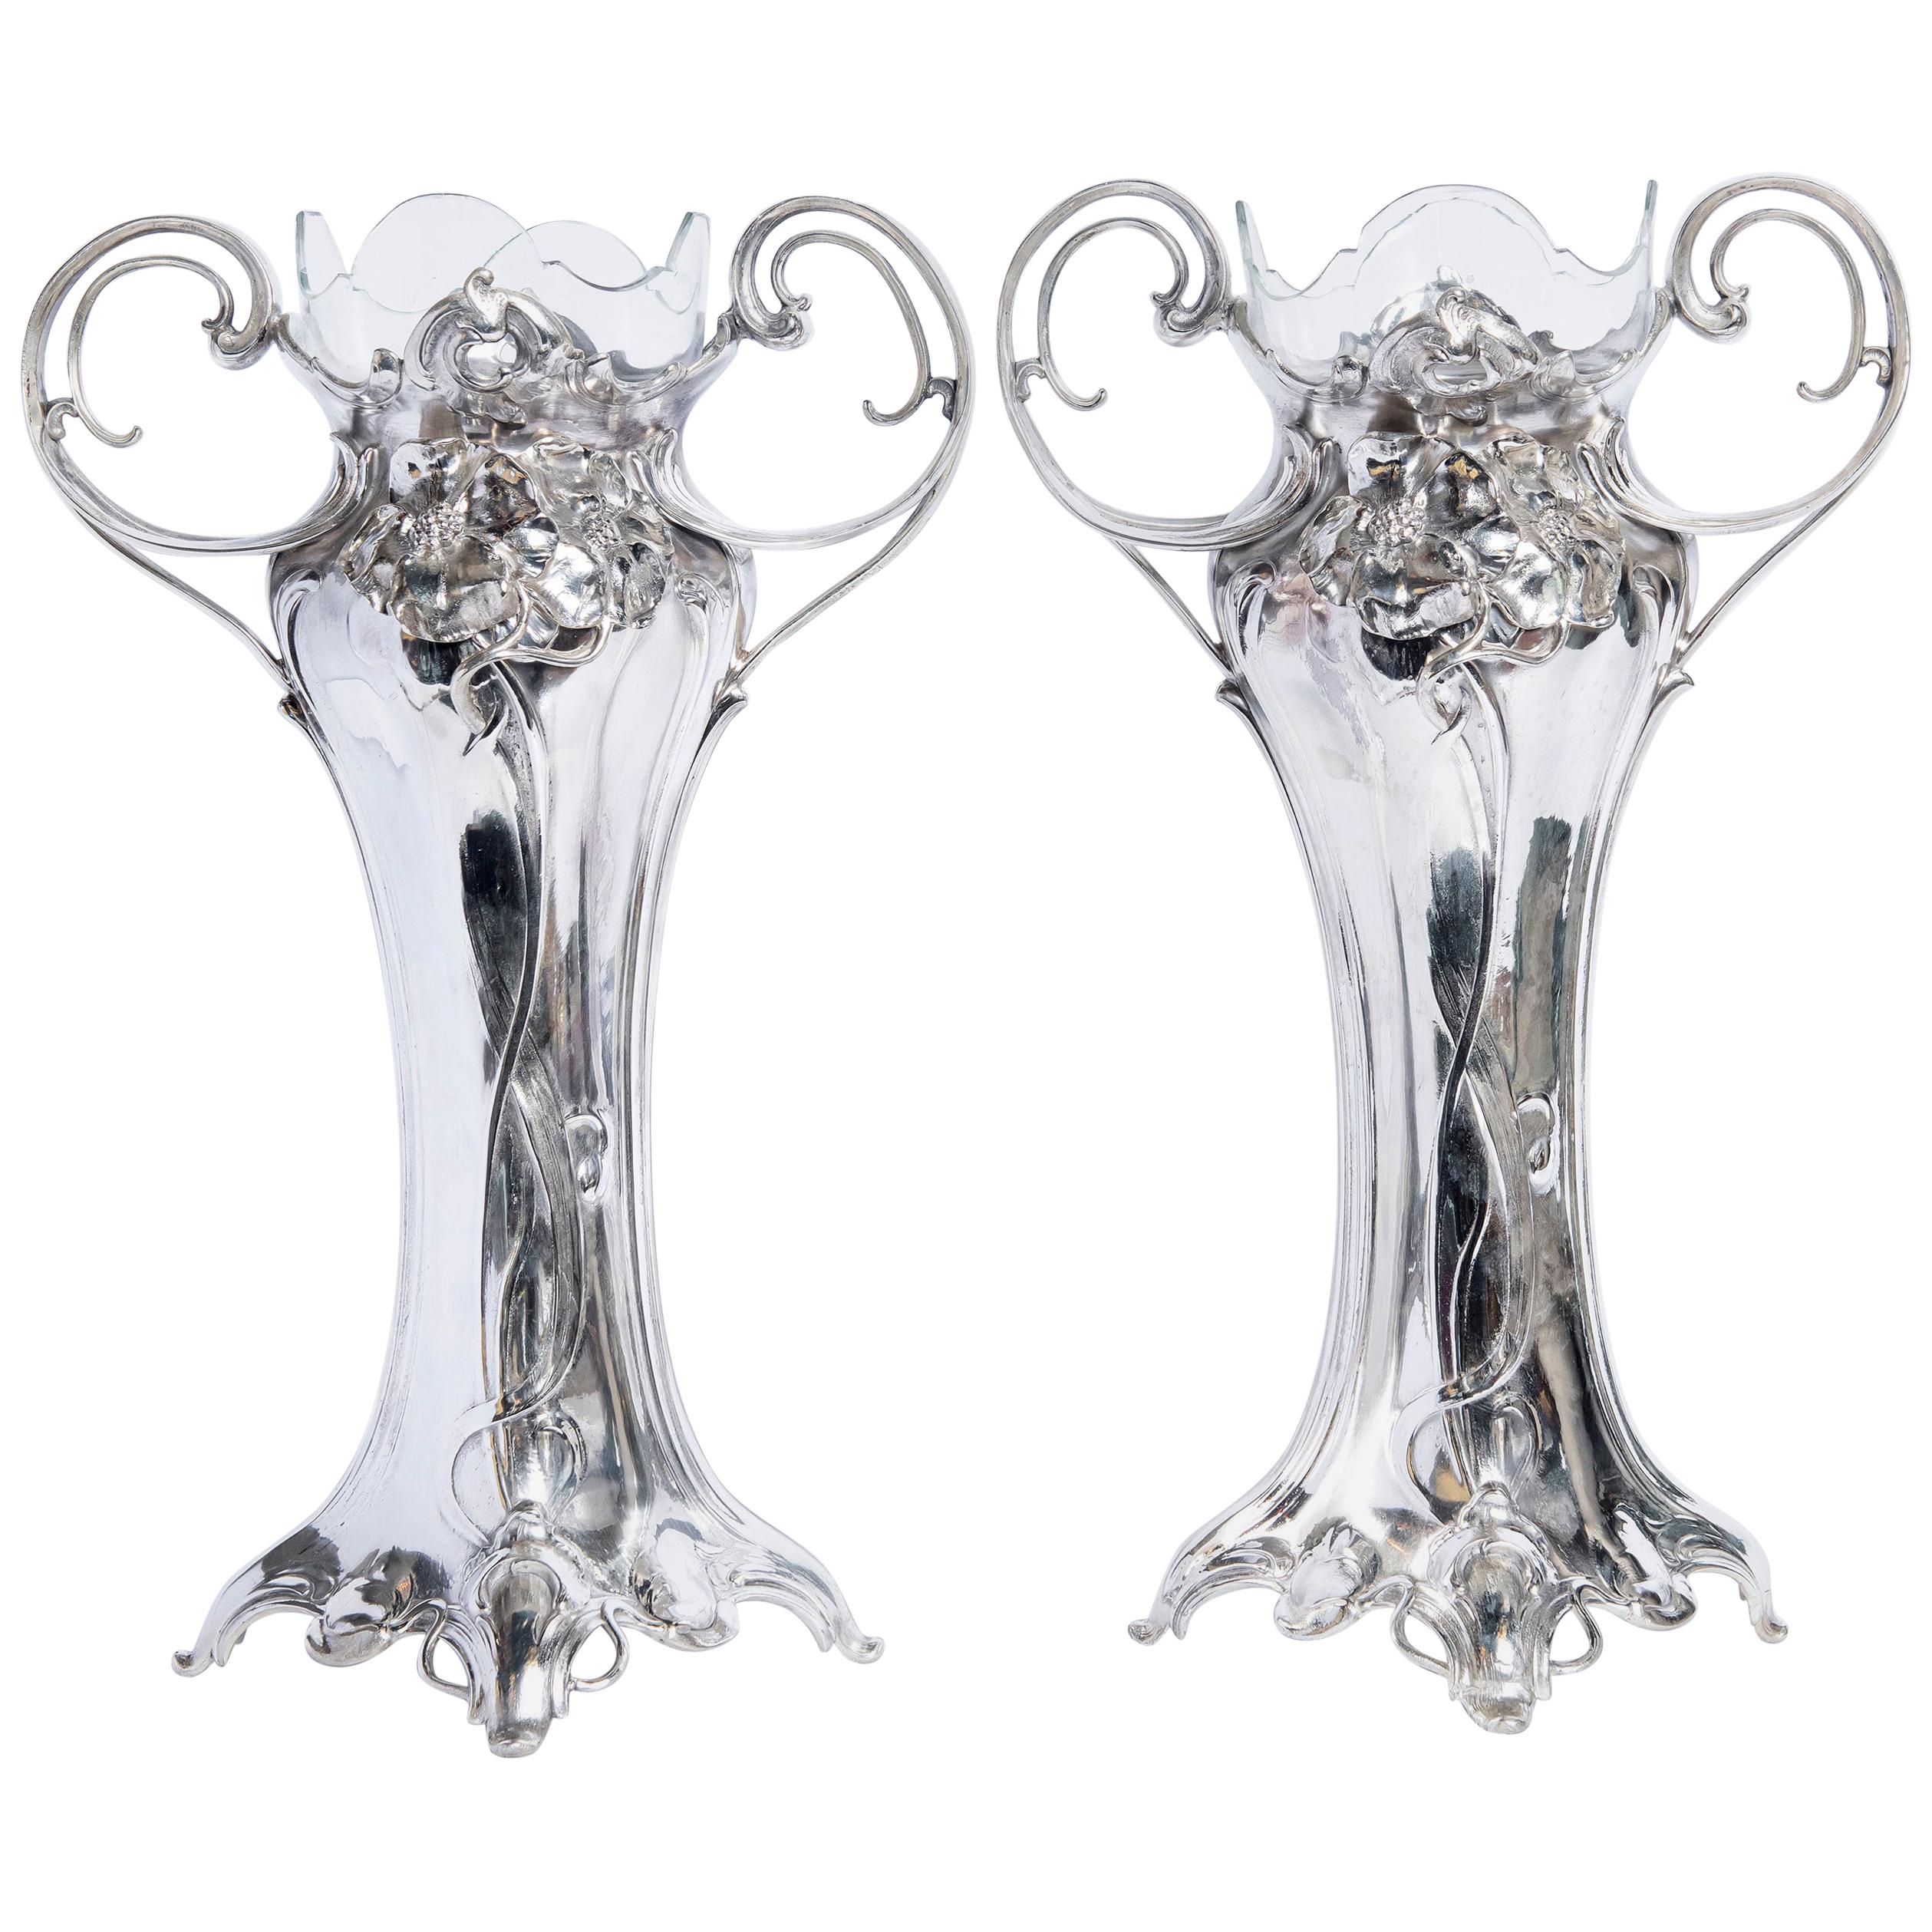 Pair of W.M.F. Silver Plate Flower Vases with Glass, Jugendstil Period For Sale